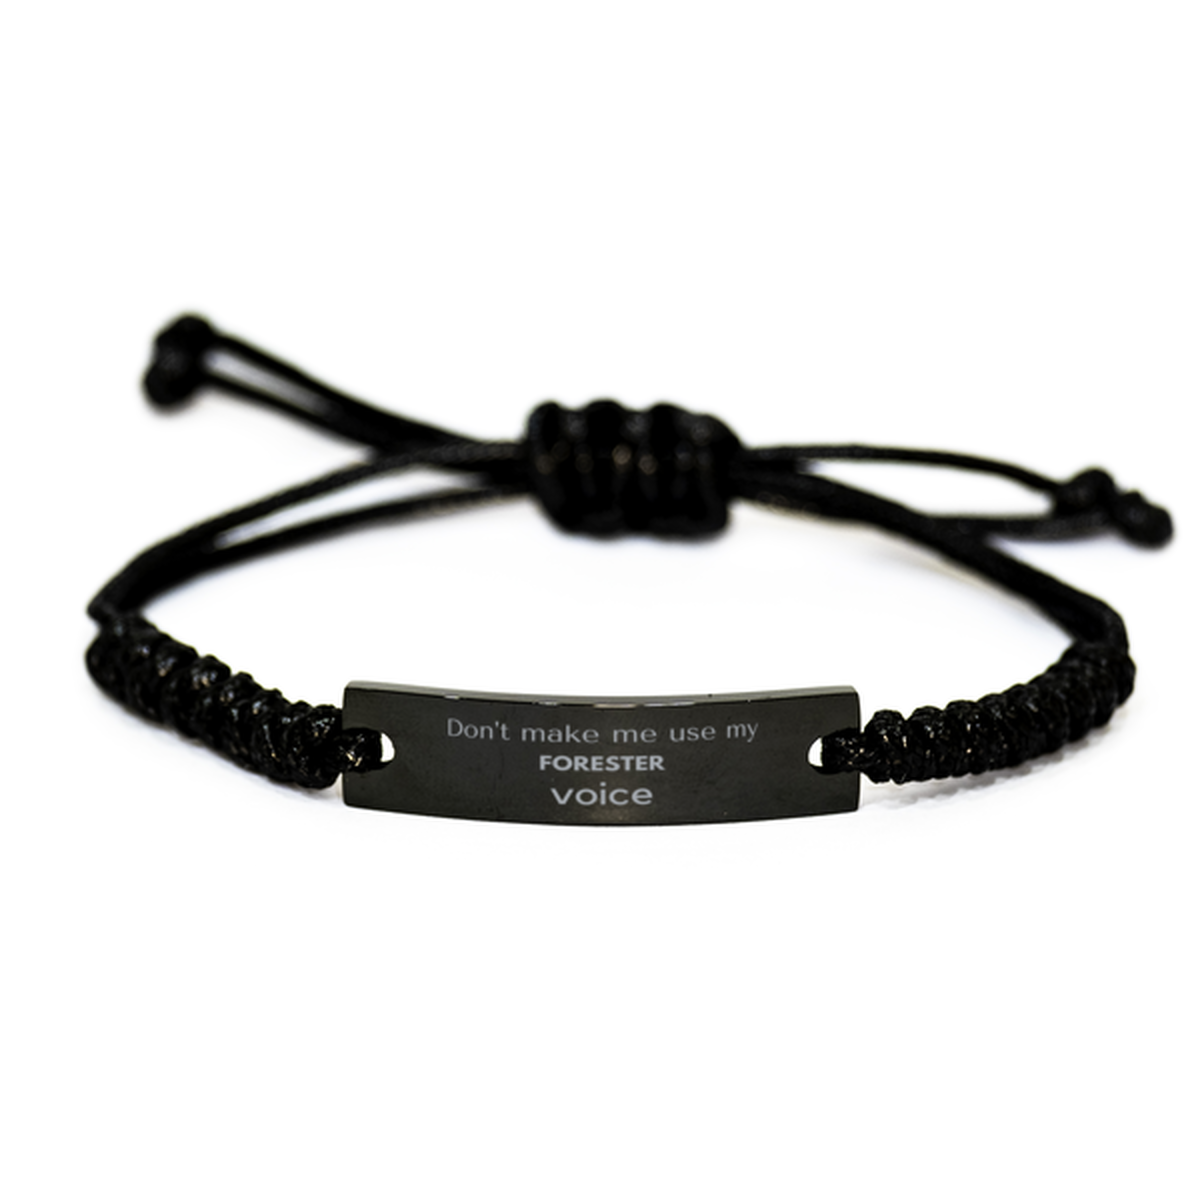 Don't make me use my Forester voice, Sarcasm Forester Gifts, Christmas Forester Black Rope Bracelet Birthday Unique Gifts For Forester Coworkers, Men, Women, Colleague, Friends